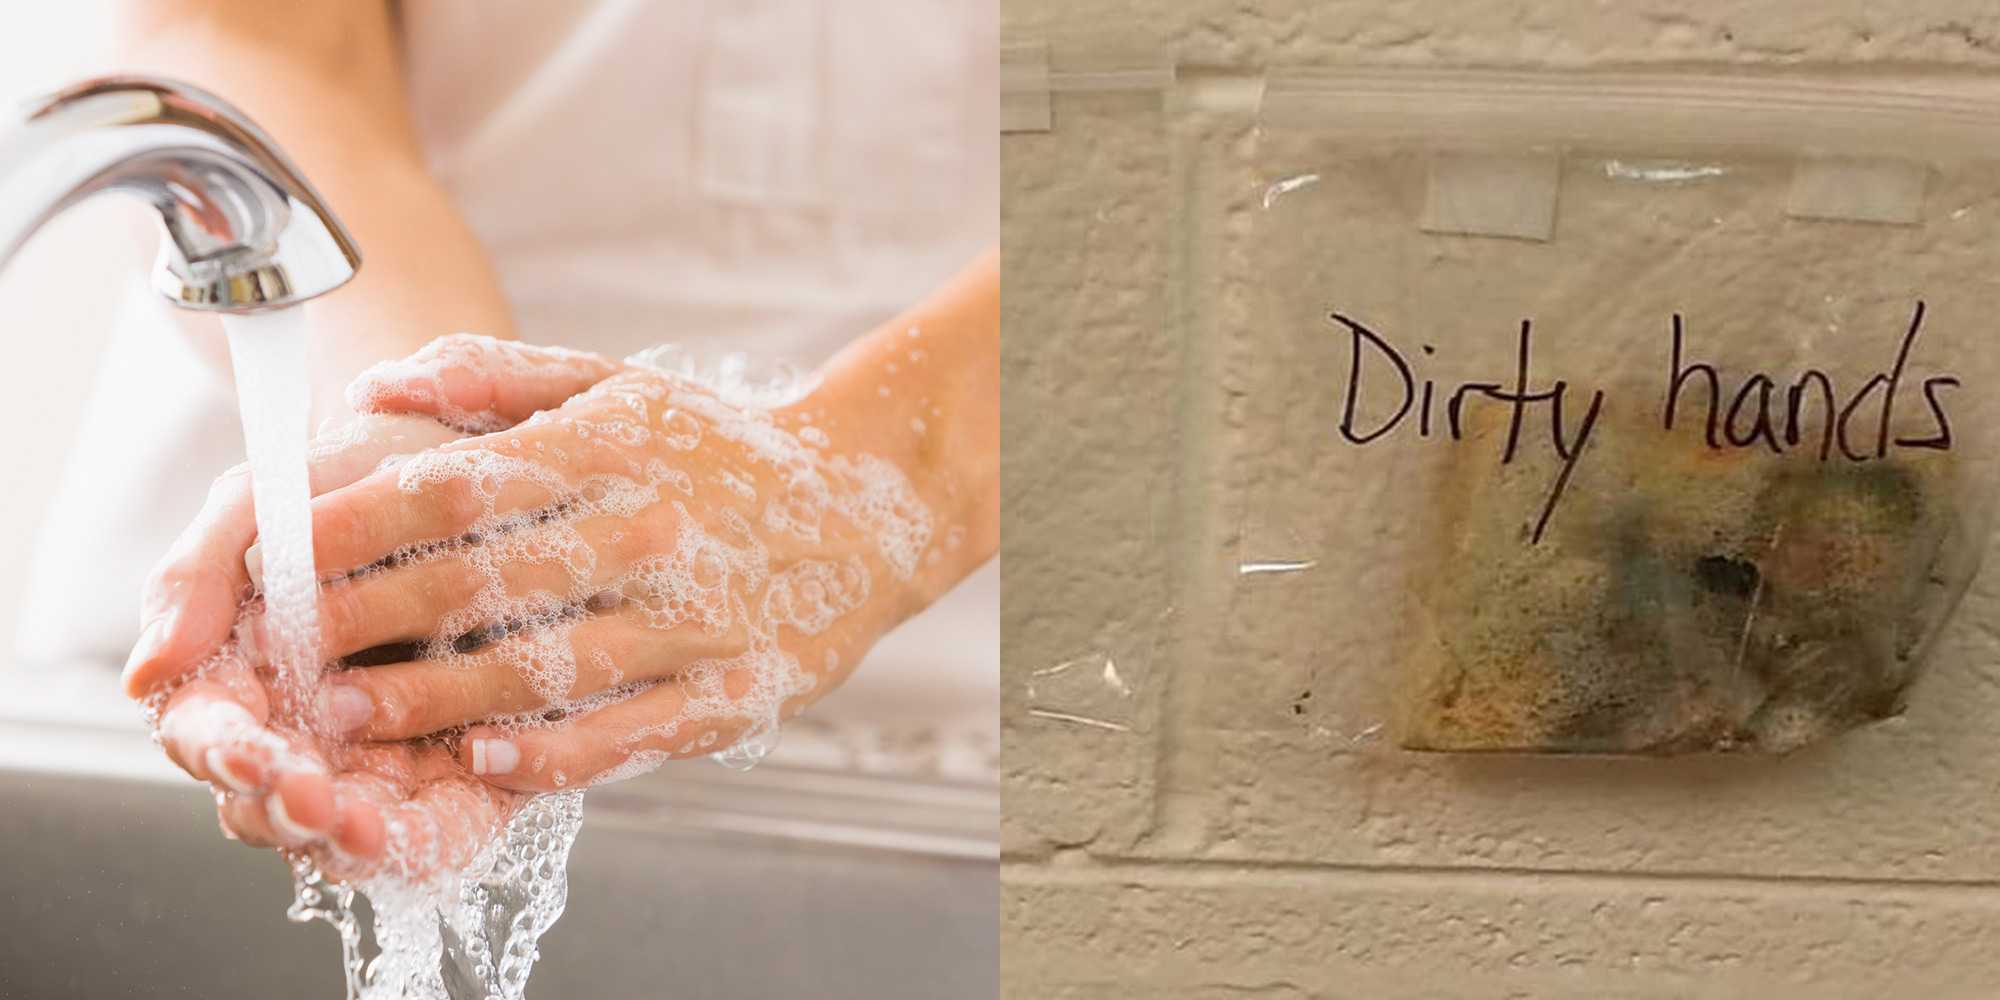 This gross experiment is here to remind you of the importance of hand washing